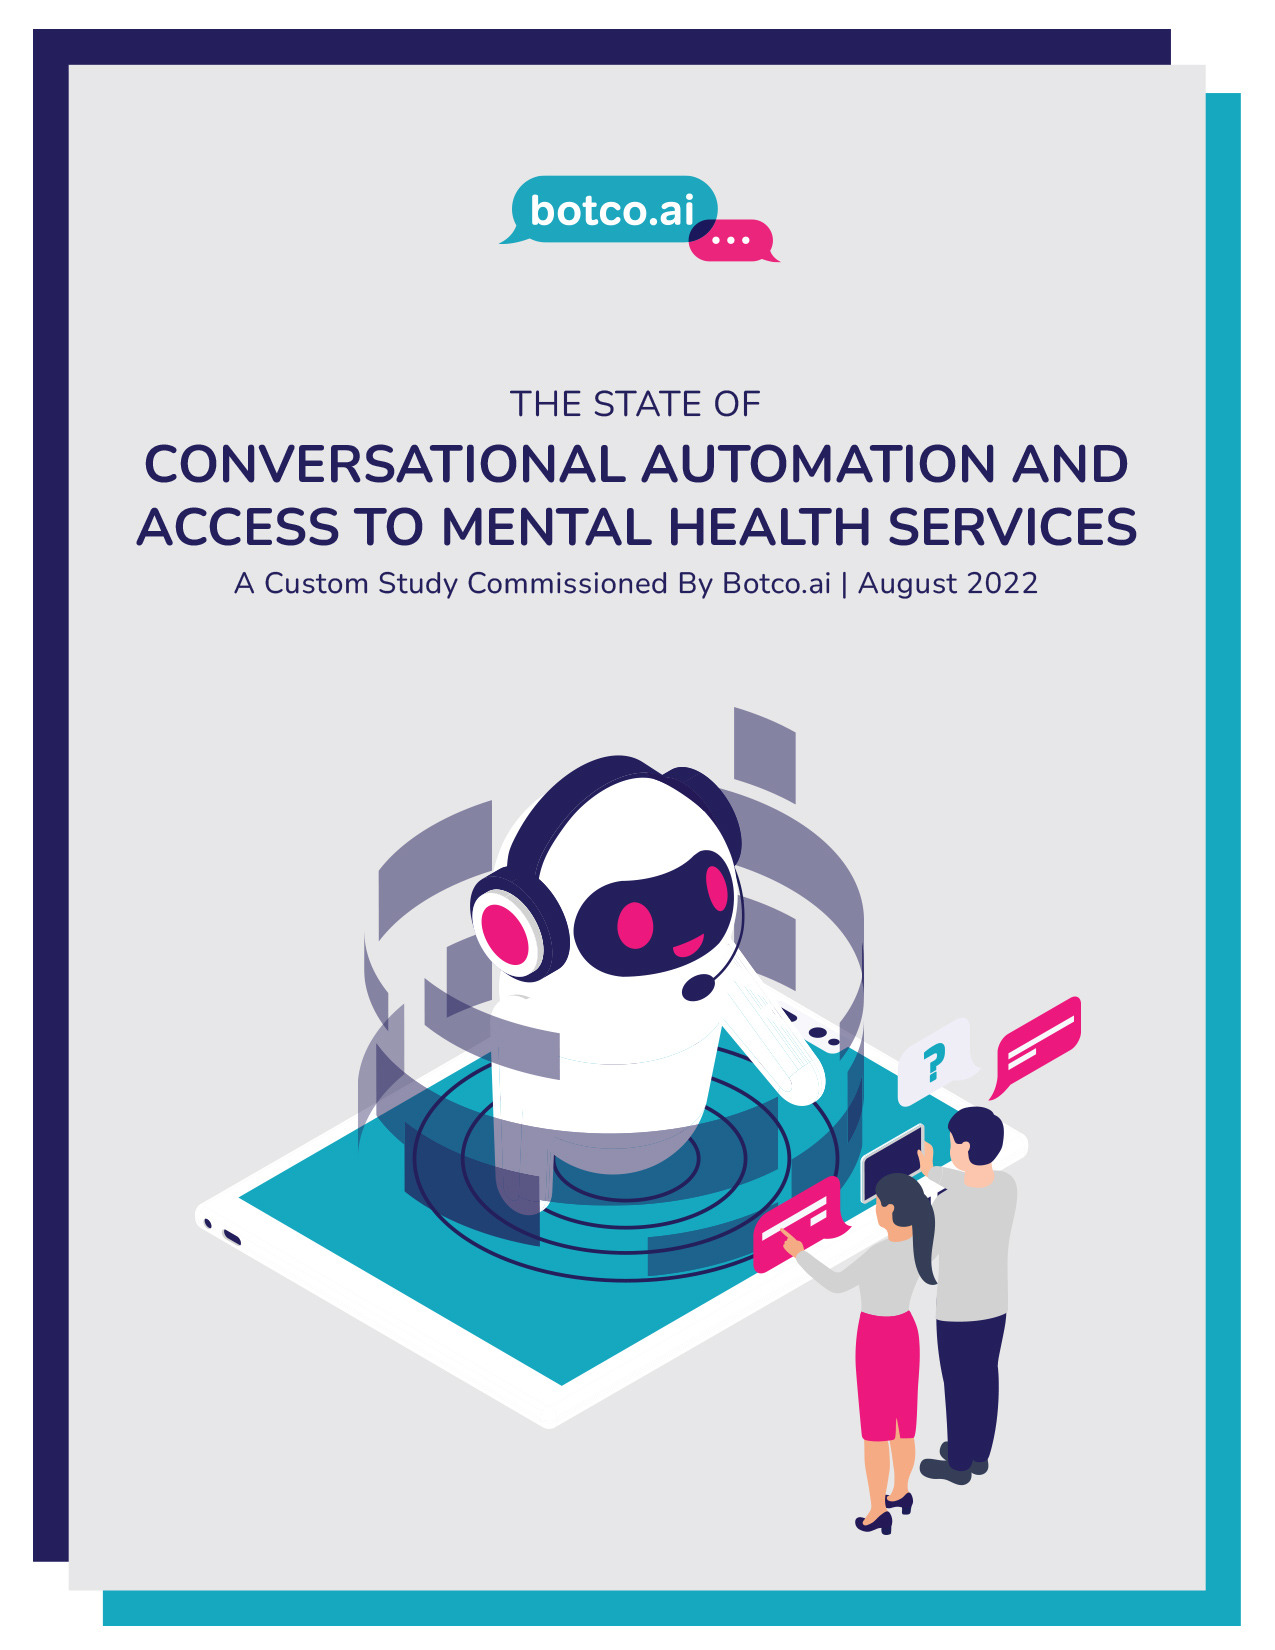 The State of Conversational Automation and Access to Mental Health Services